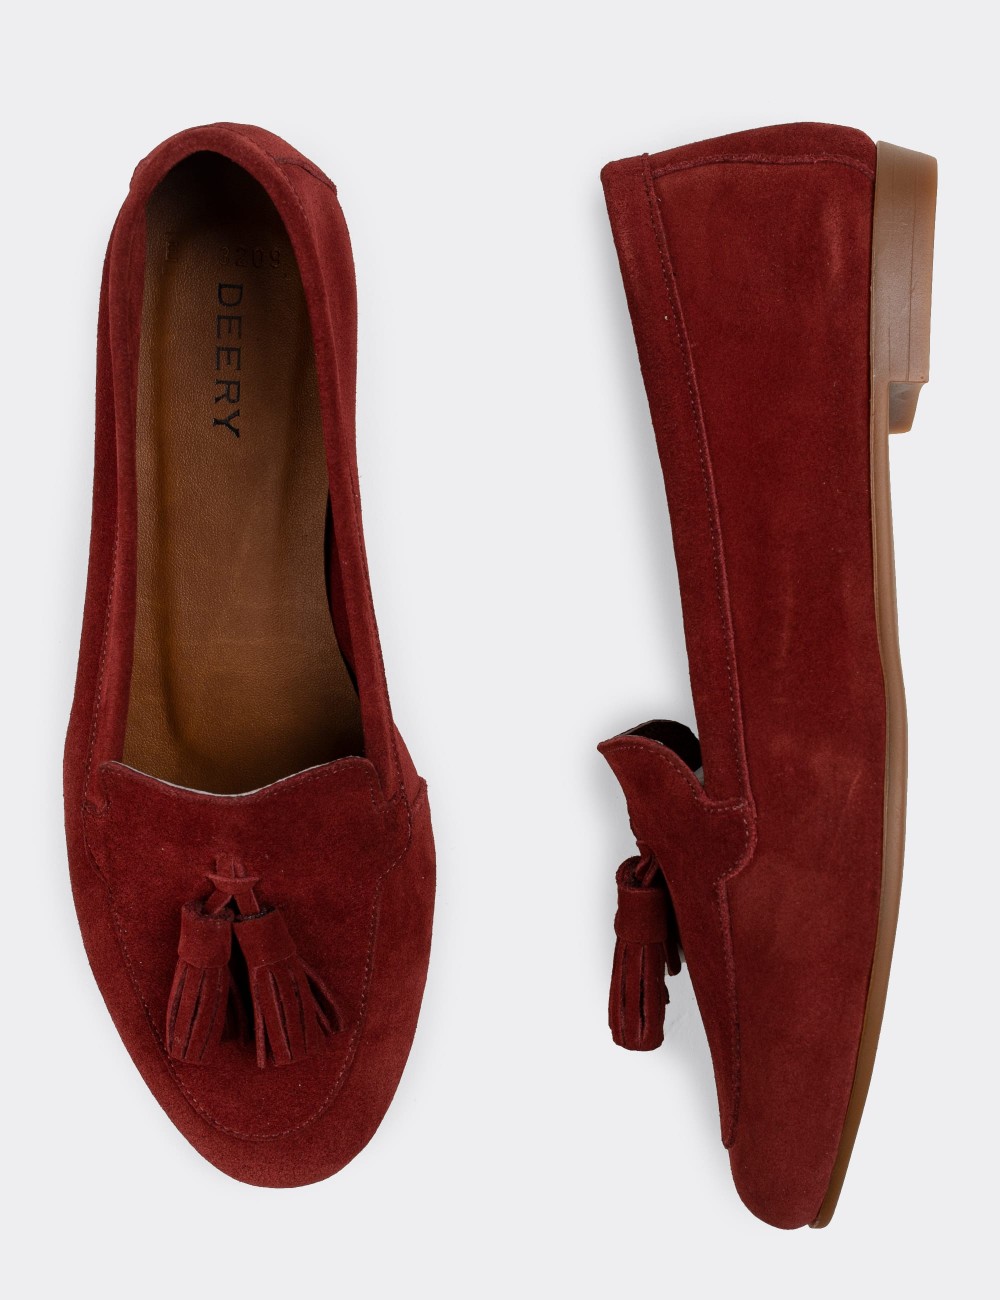 Burgundy Suede Leather Loafers - E3209ZBRDC01